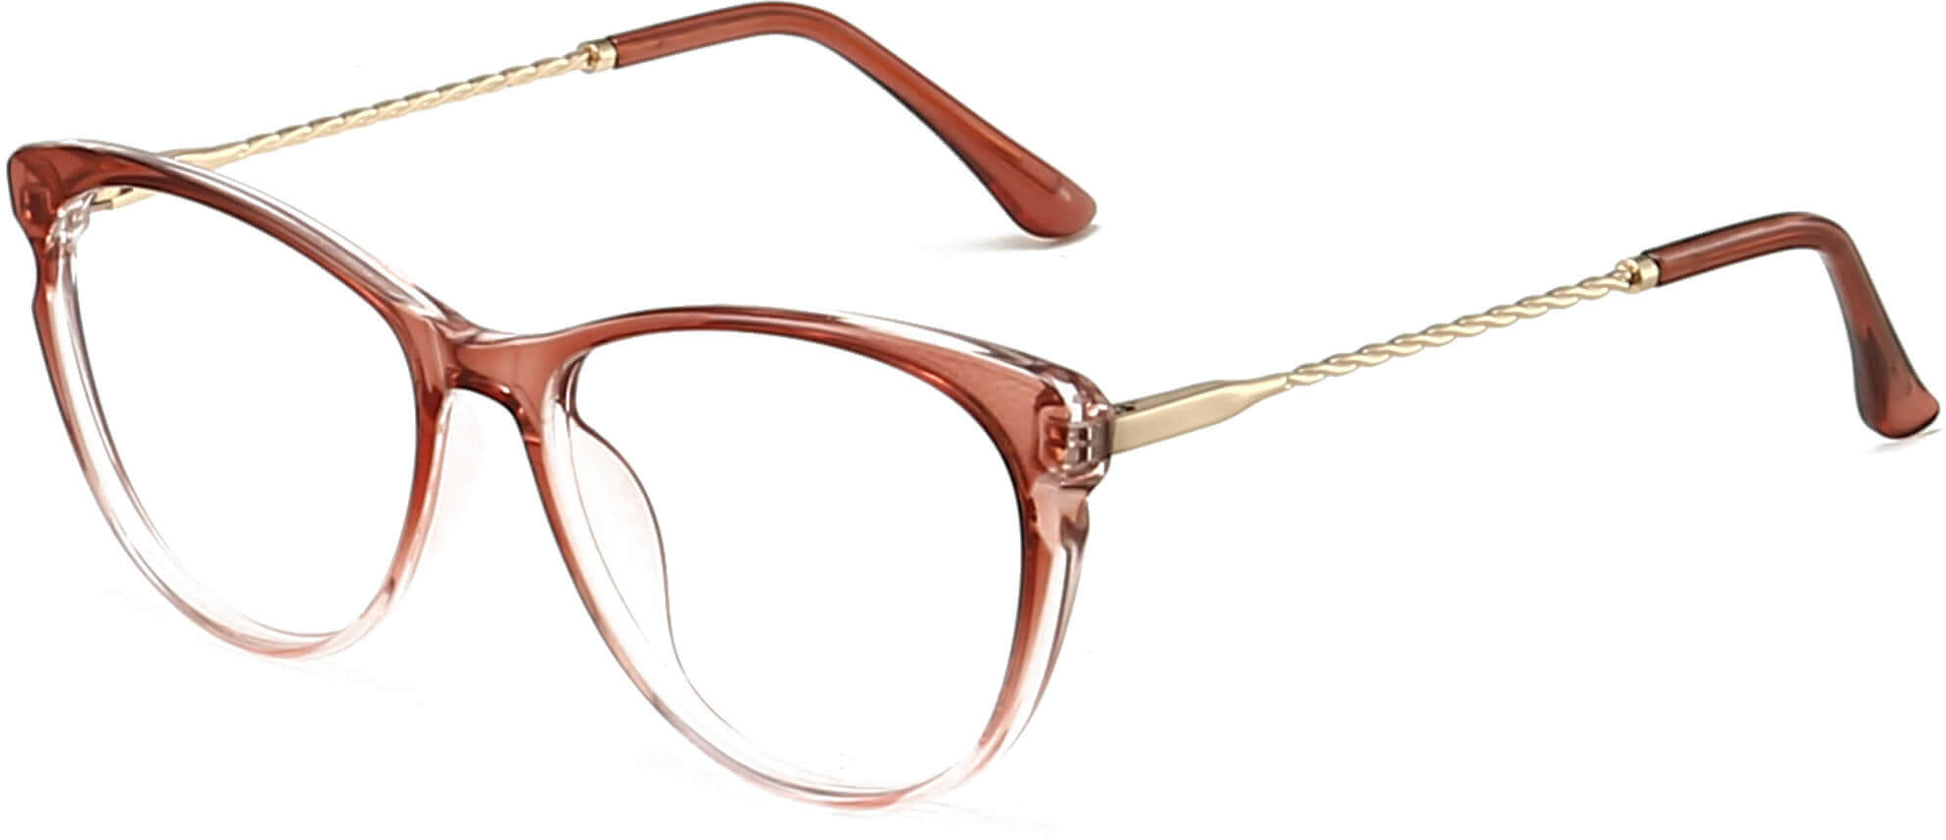 Susanna Cateye Pink Eyeglasses from ANRRI, angle view